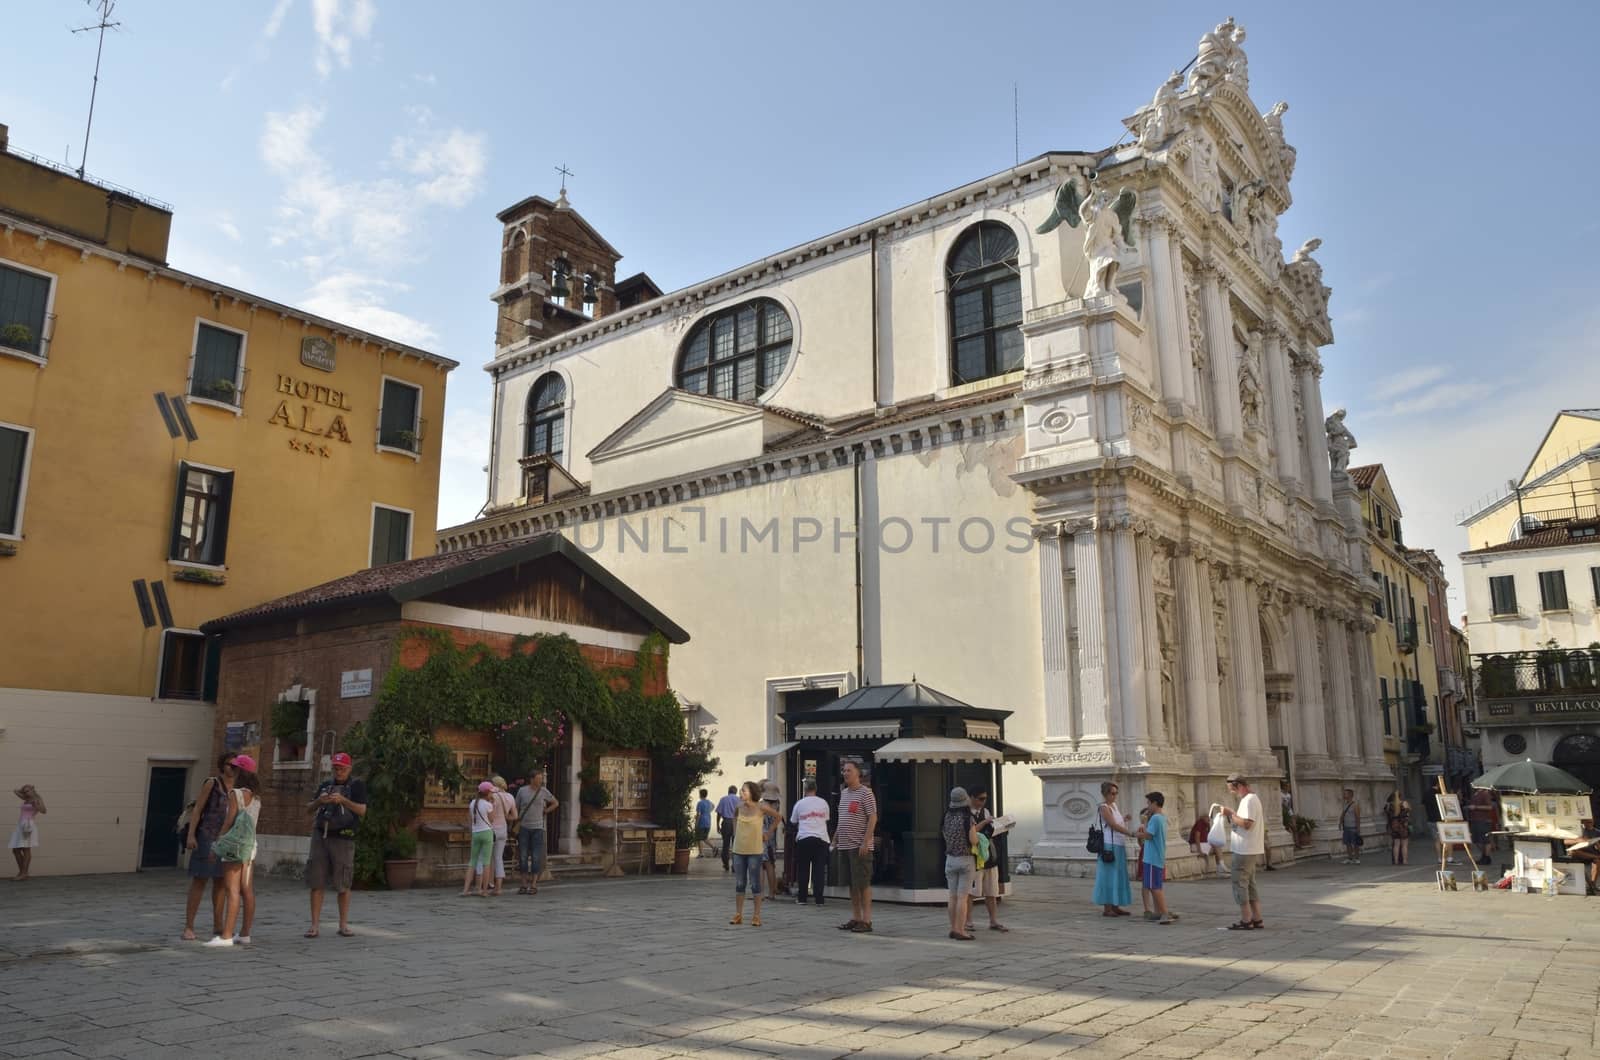 The church of St. Mary of the Lily , is more commonly known as Santa Maria Zobenigo after the Jubanico family who founded it in the 9th century. The edifice is situated on the Campo Santa Maria Zobenigo, west of the Piazza San Marco, Venice, Italy.
